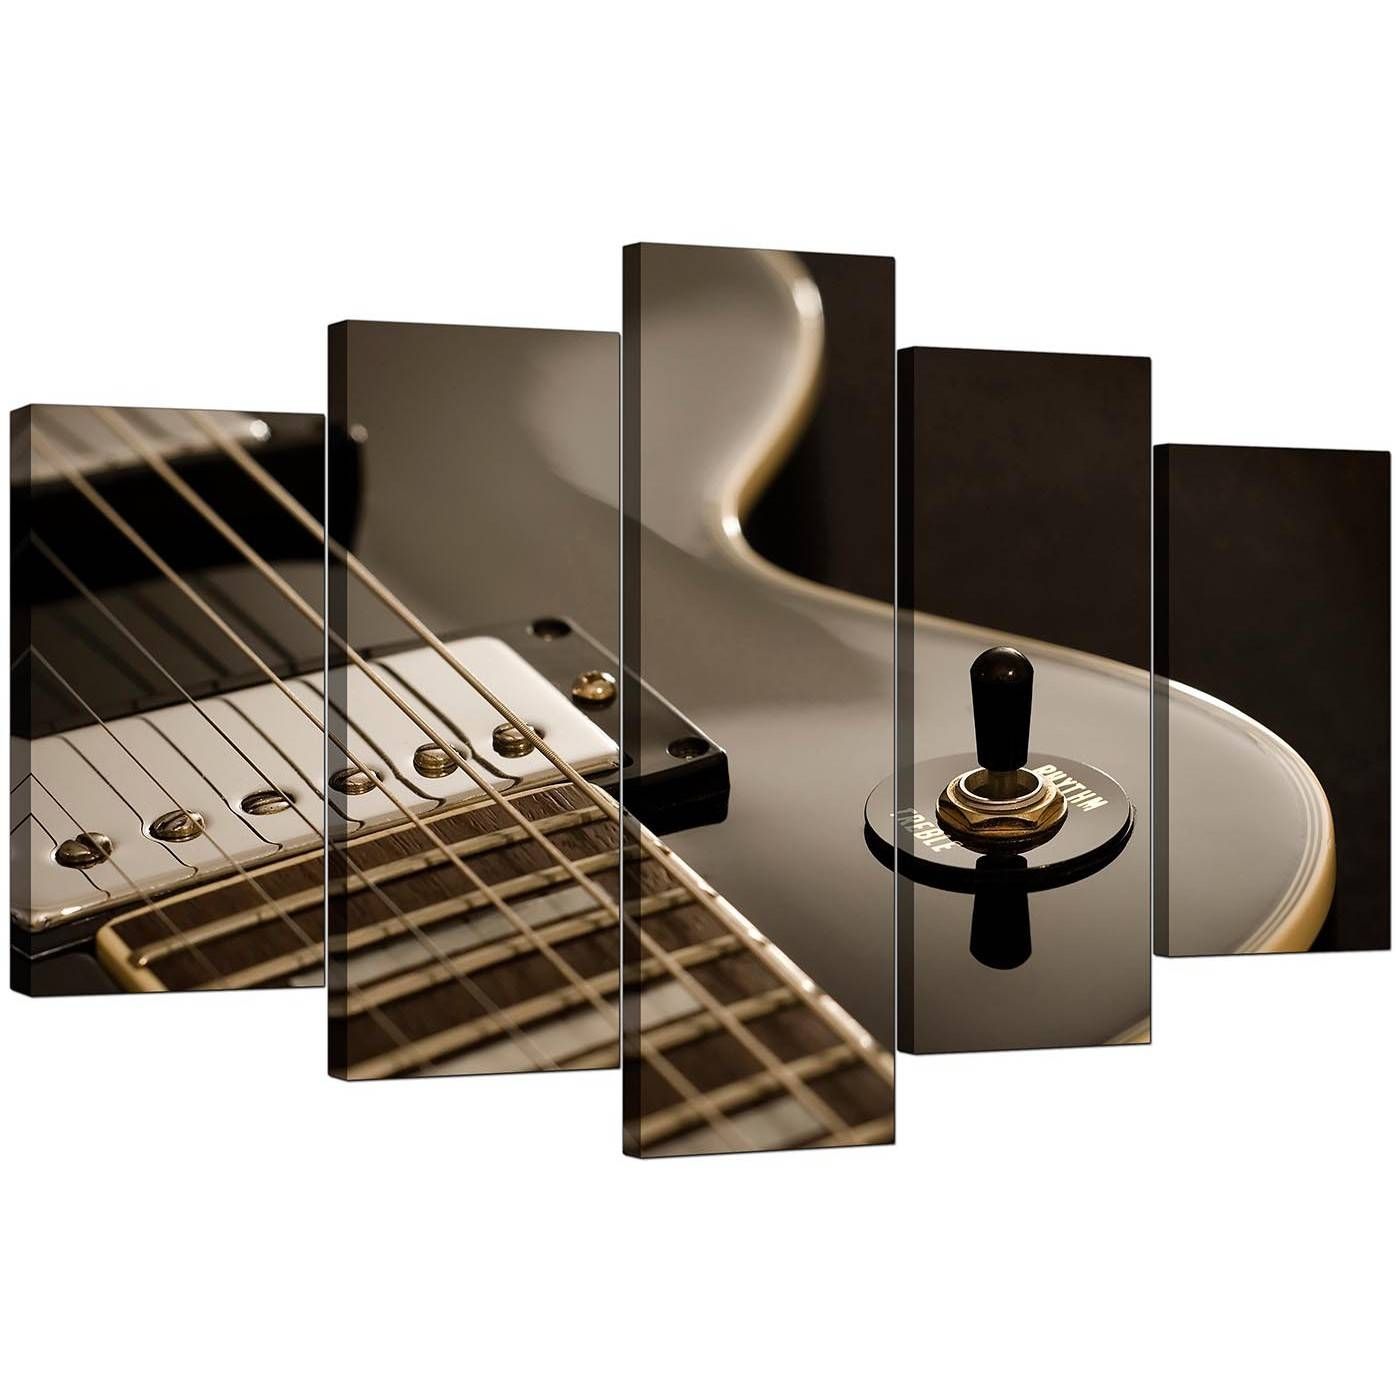 Extra Large Guitar Canvas Prints Uk 5 Piece In Black & White Throughout Recent Guitar Canvas Wall Art (View 1 of 20)